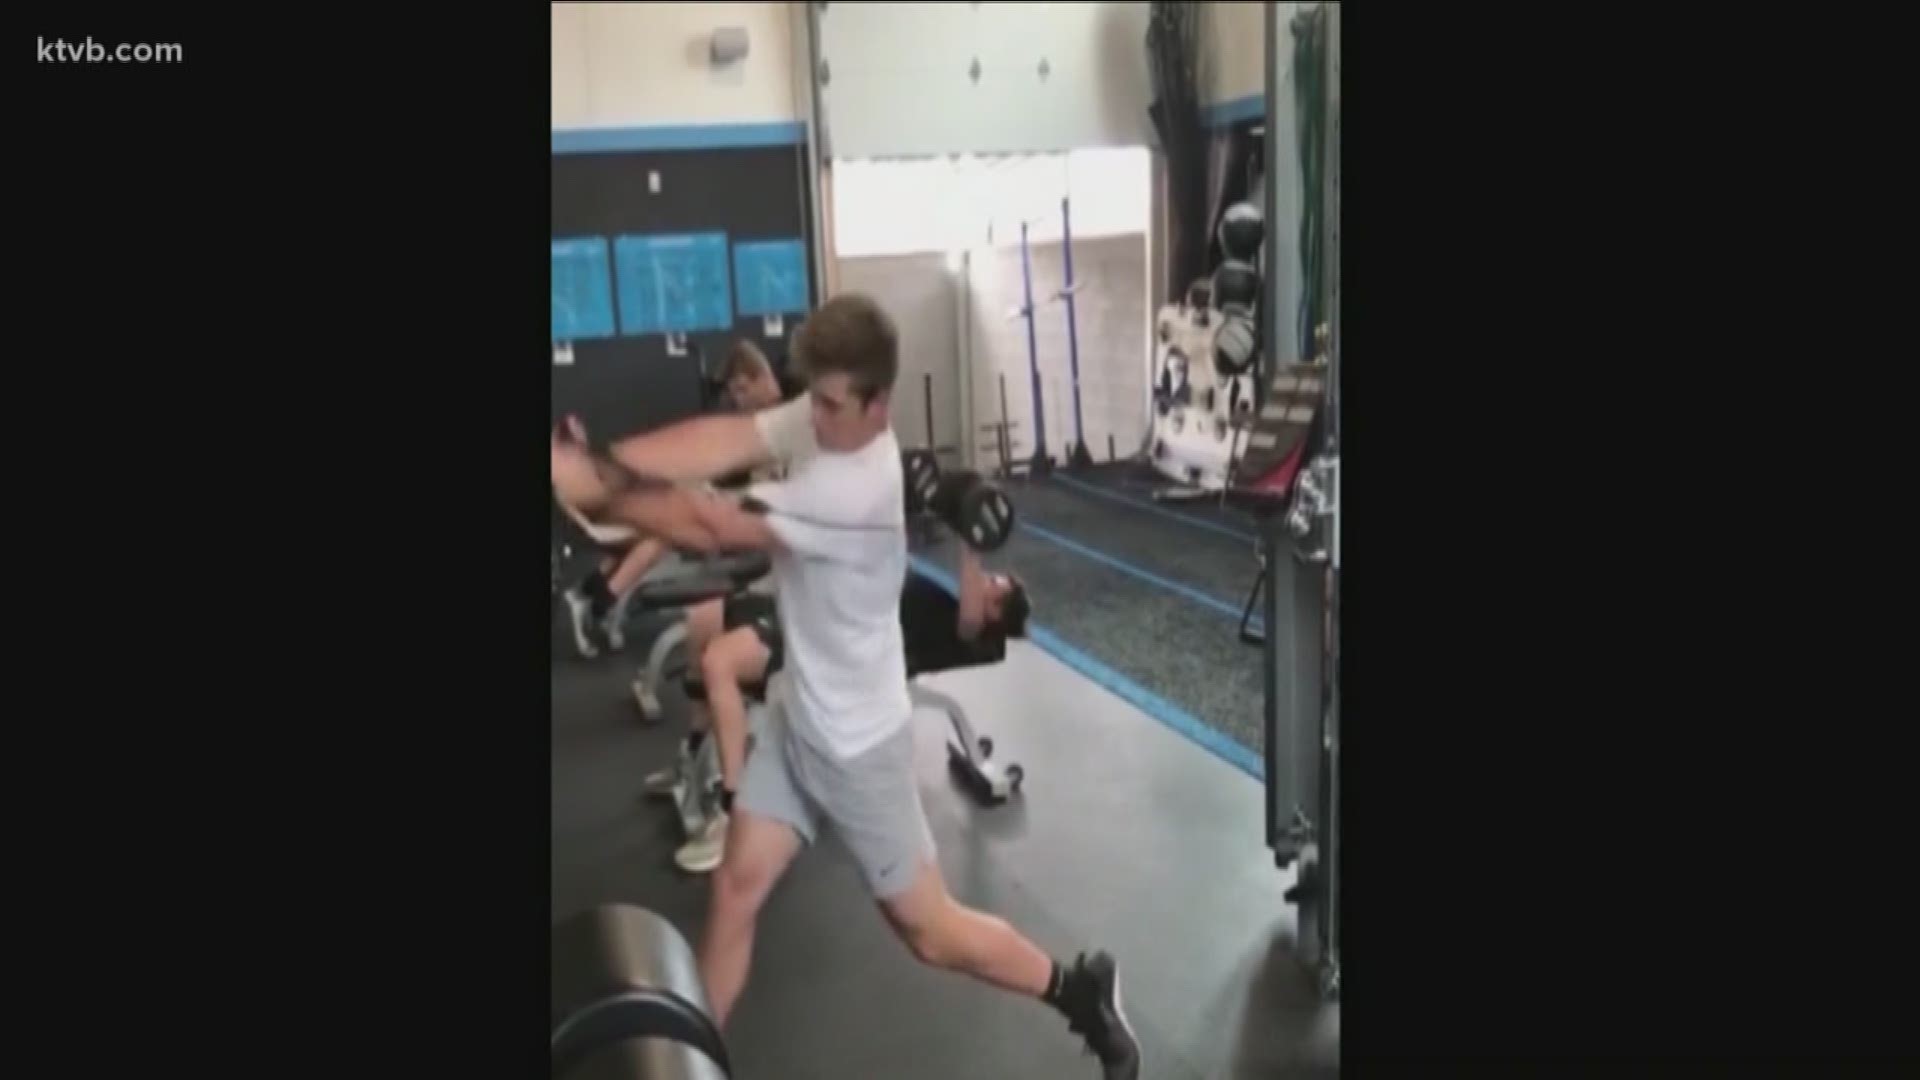 Jackson Cluff also explained to KTVB how he's staying in playing shape during the coronavirus pandemic.